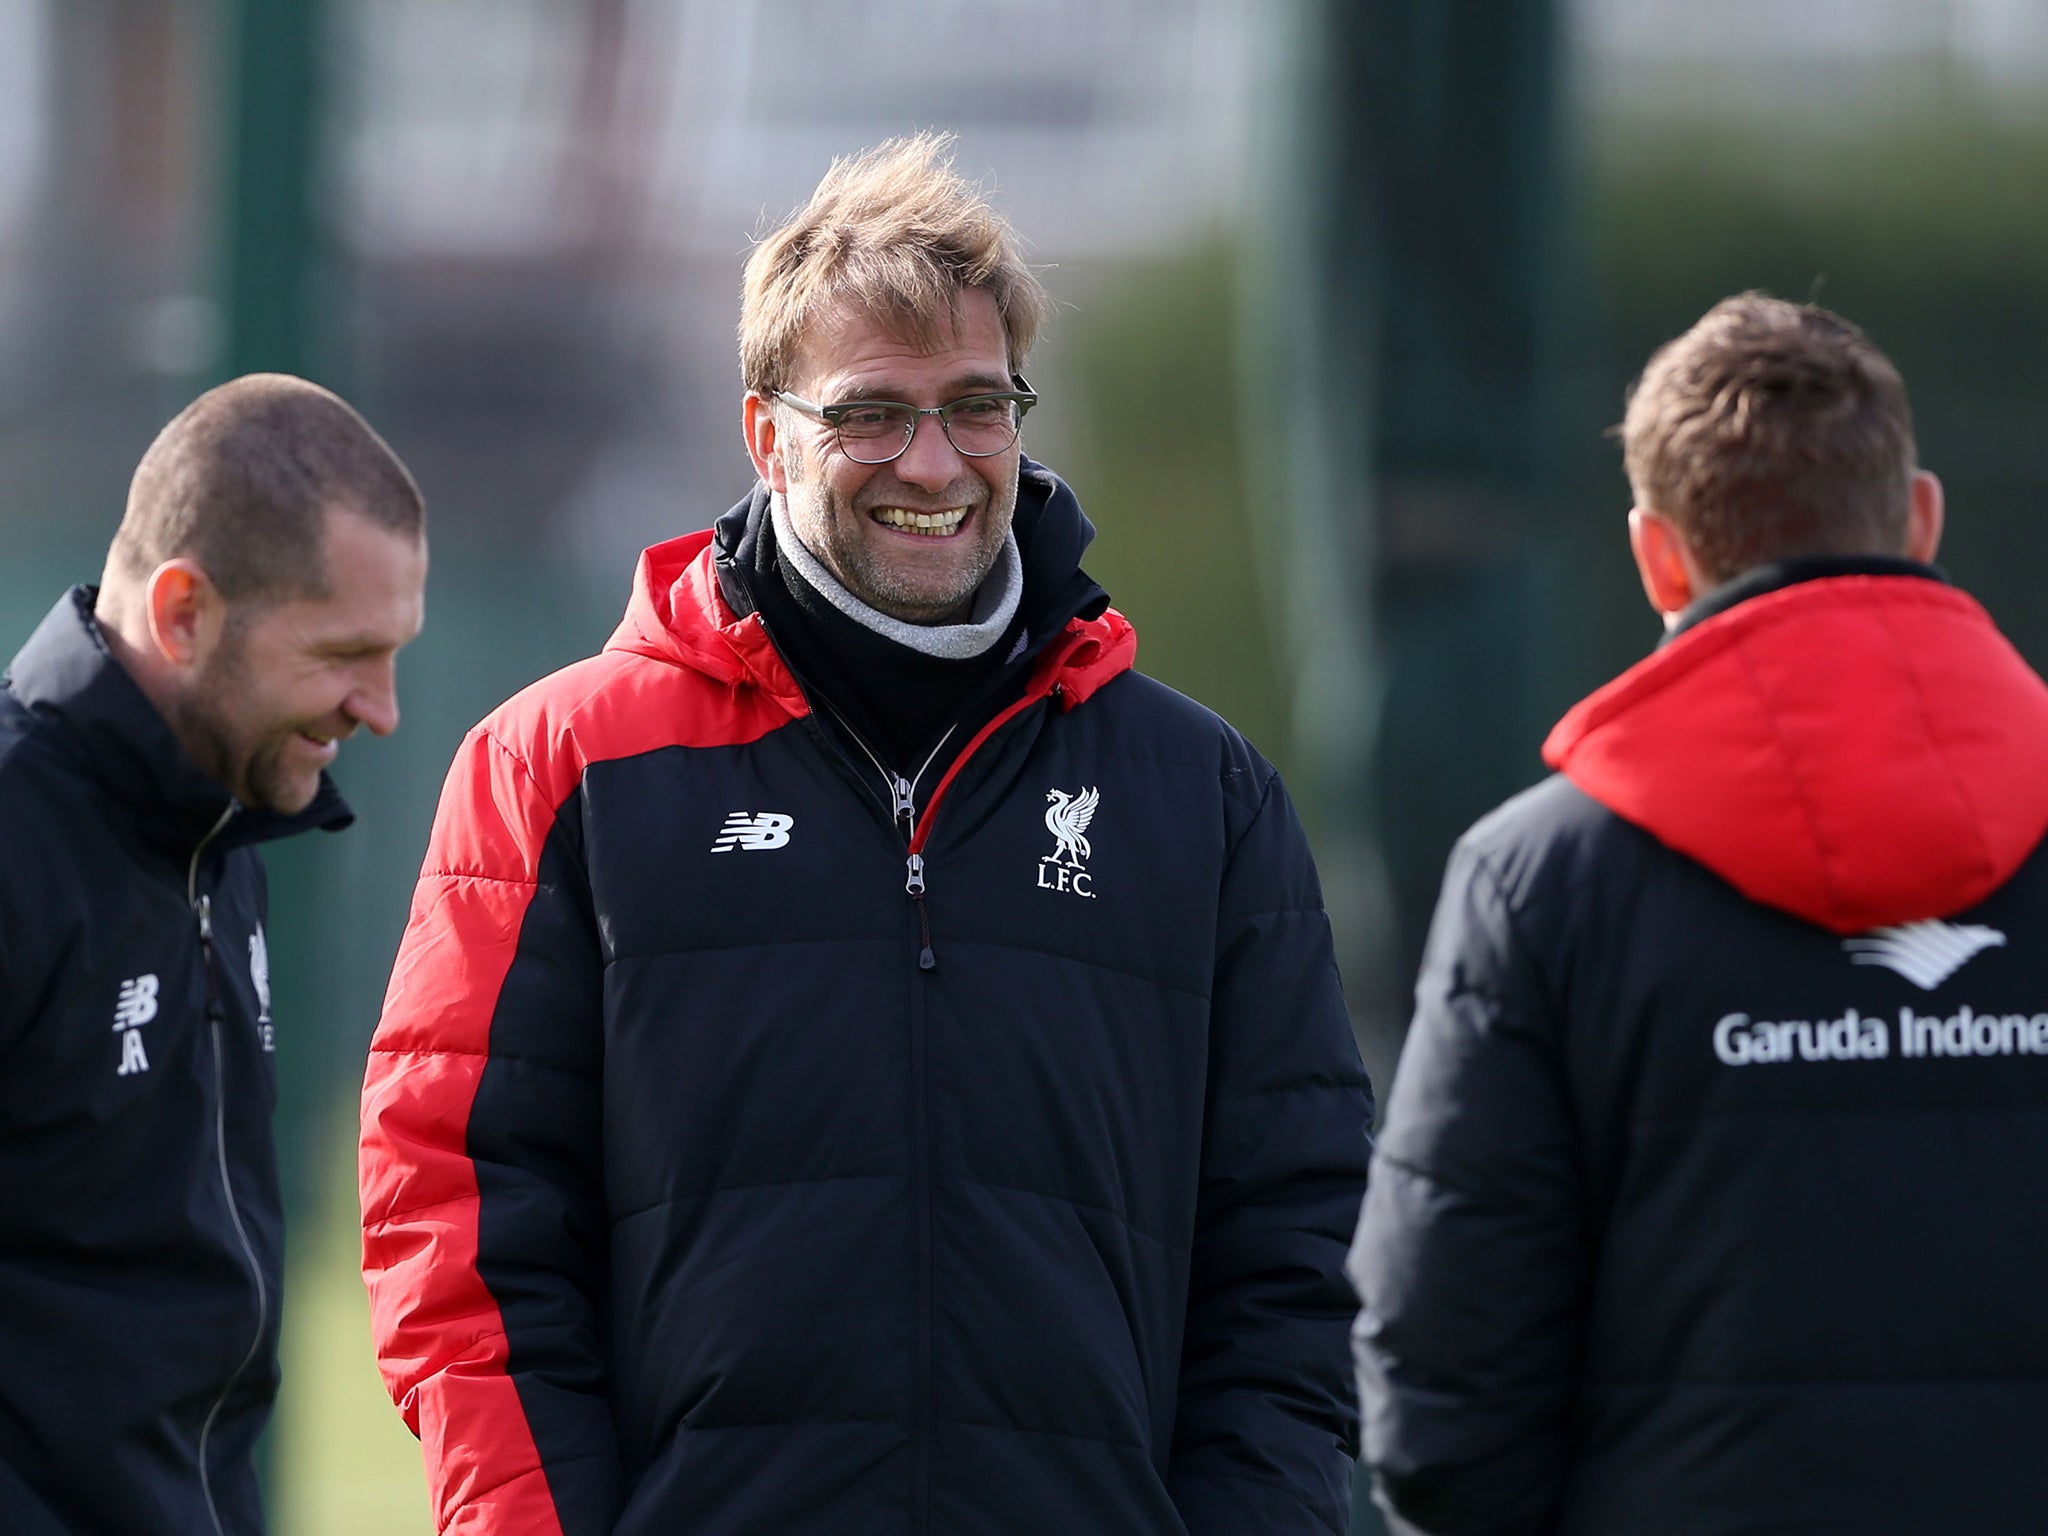 Liverpool manager Jurgen Klopp during a training session ahead of the Capital One Cup Final